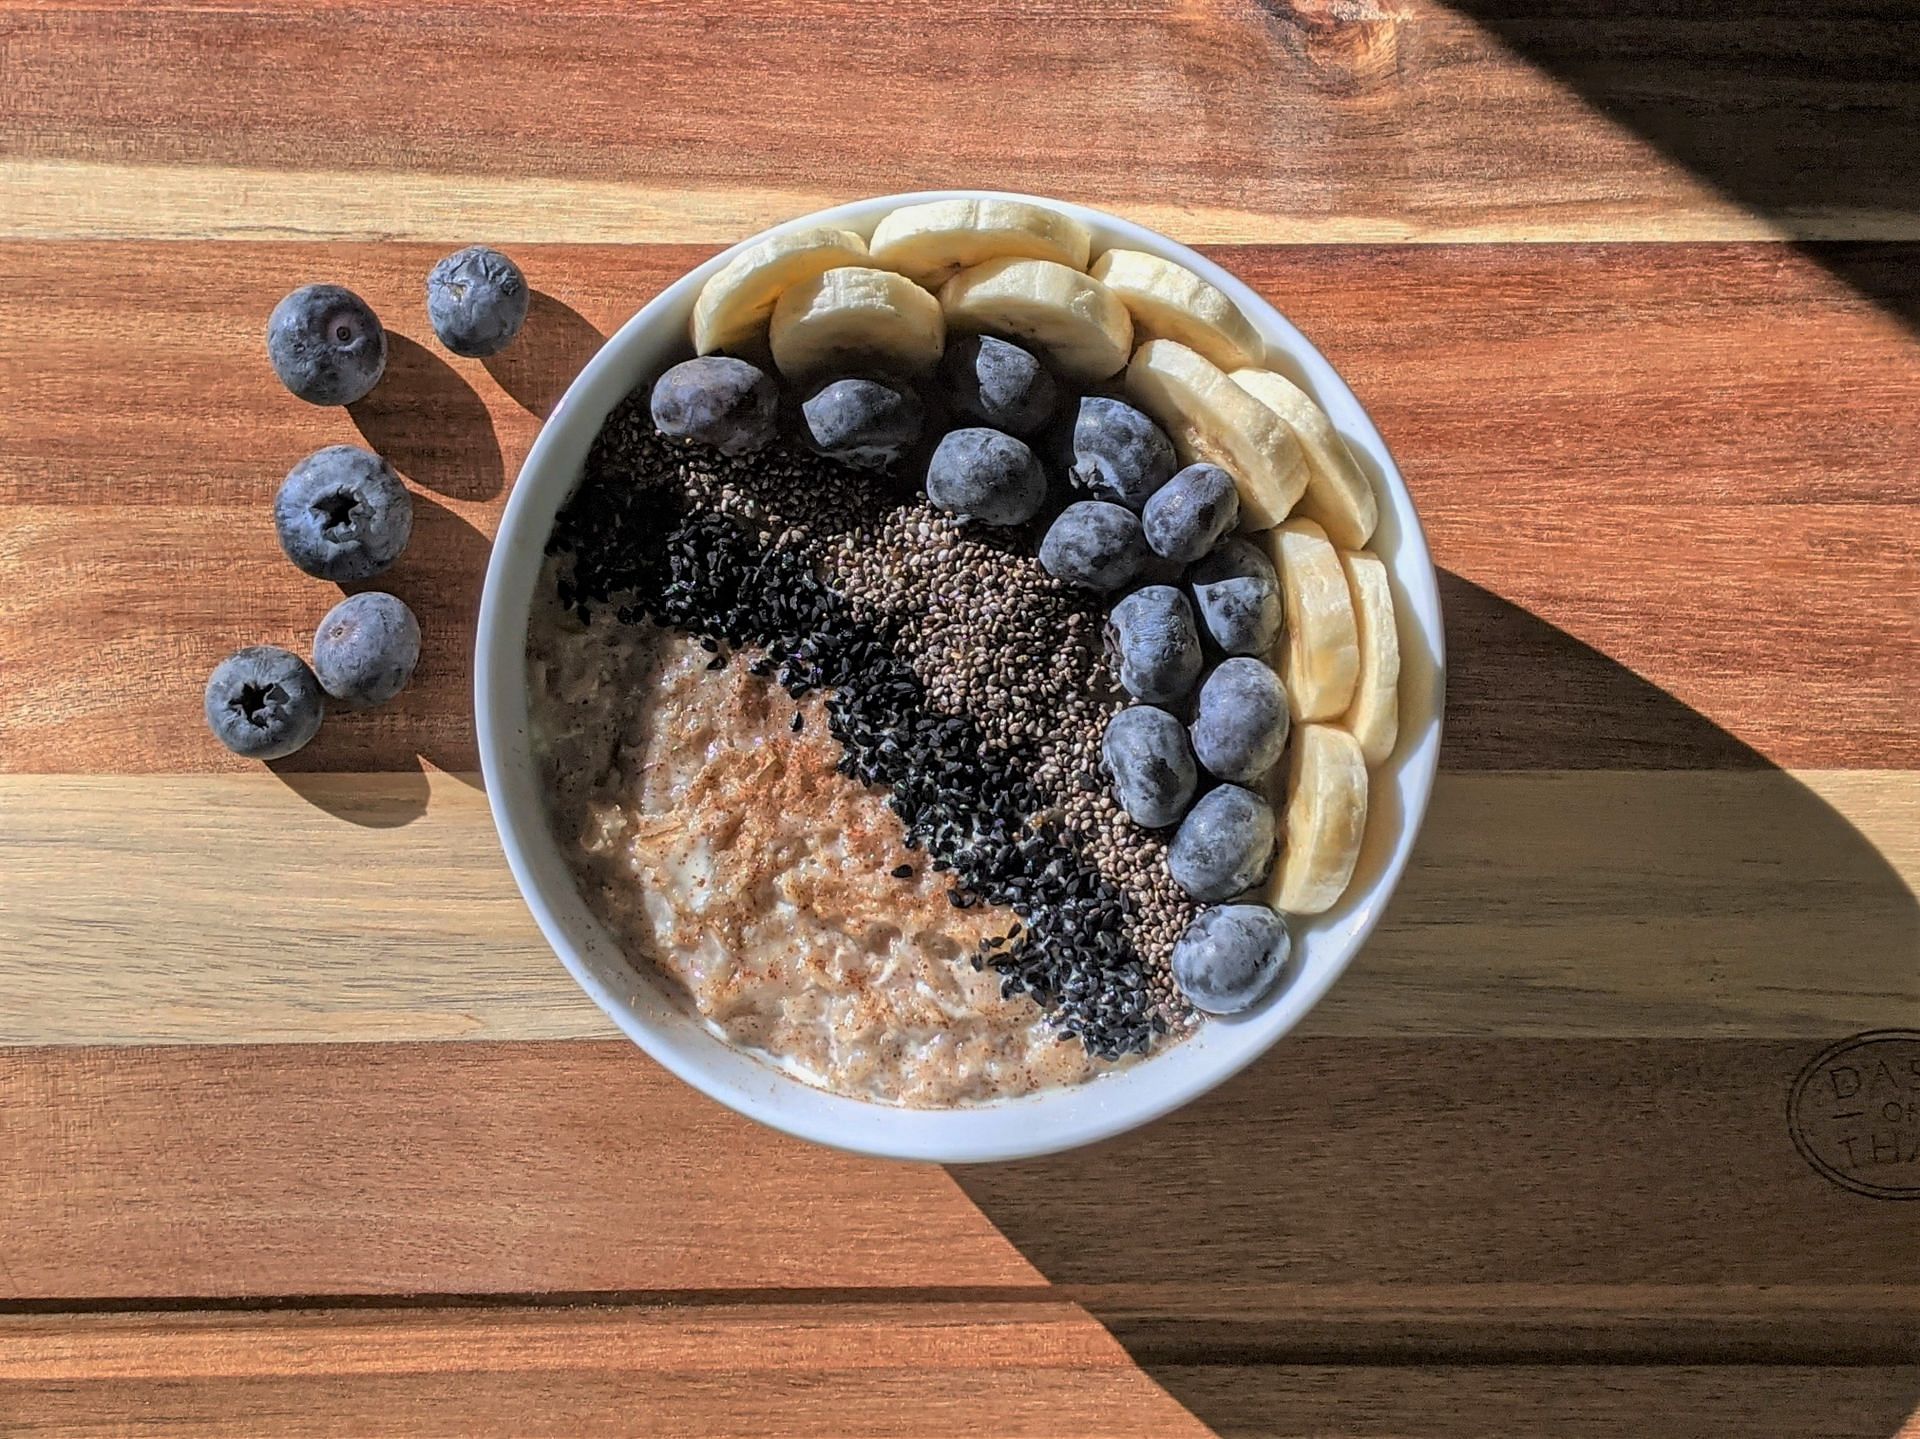 Chia seeds are a good post recovery food. (Image via Unsplash/ Susan Wilkinson)